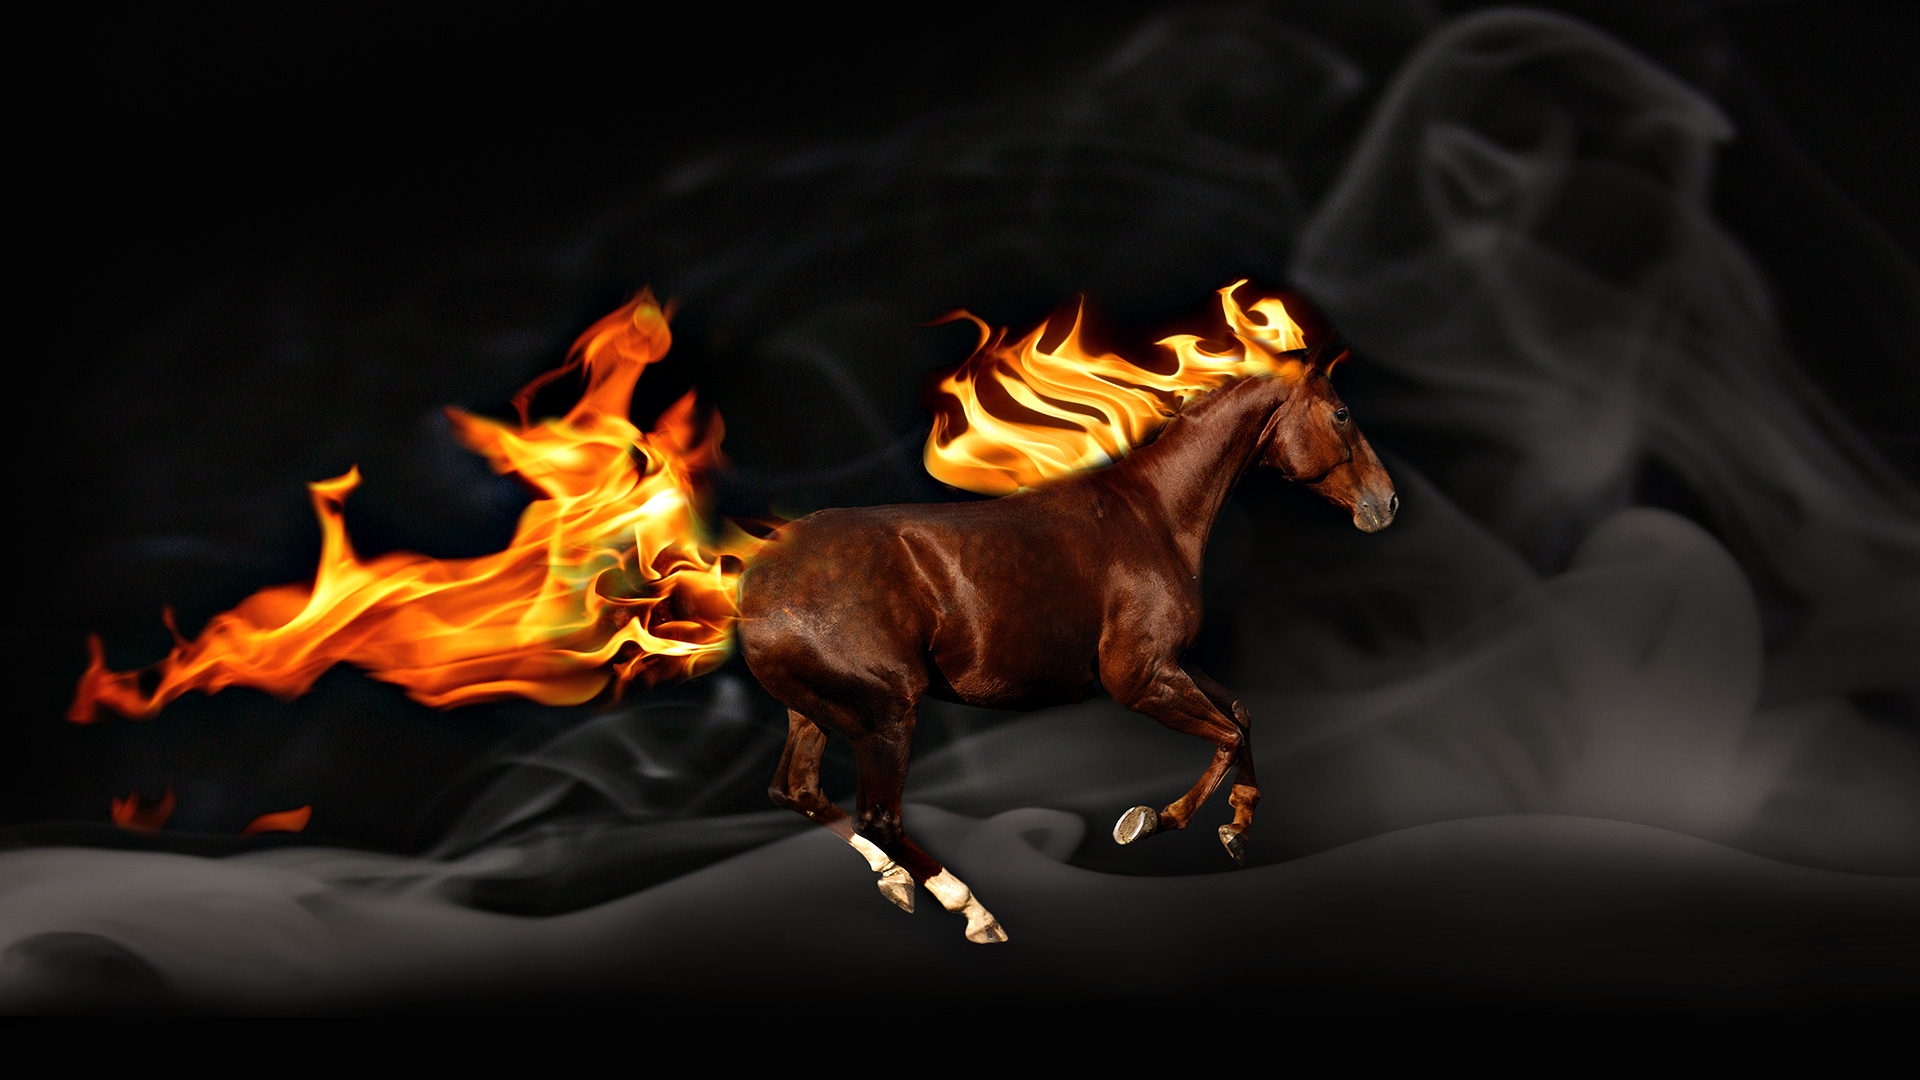 Black Horse With Fire - HD Wallpaper 